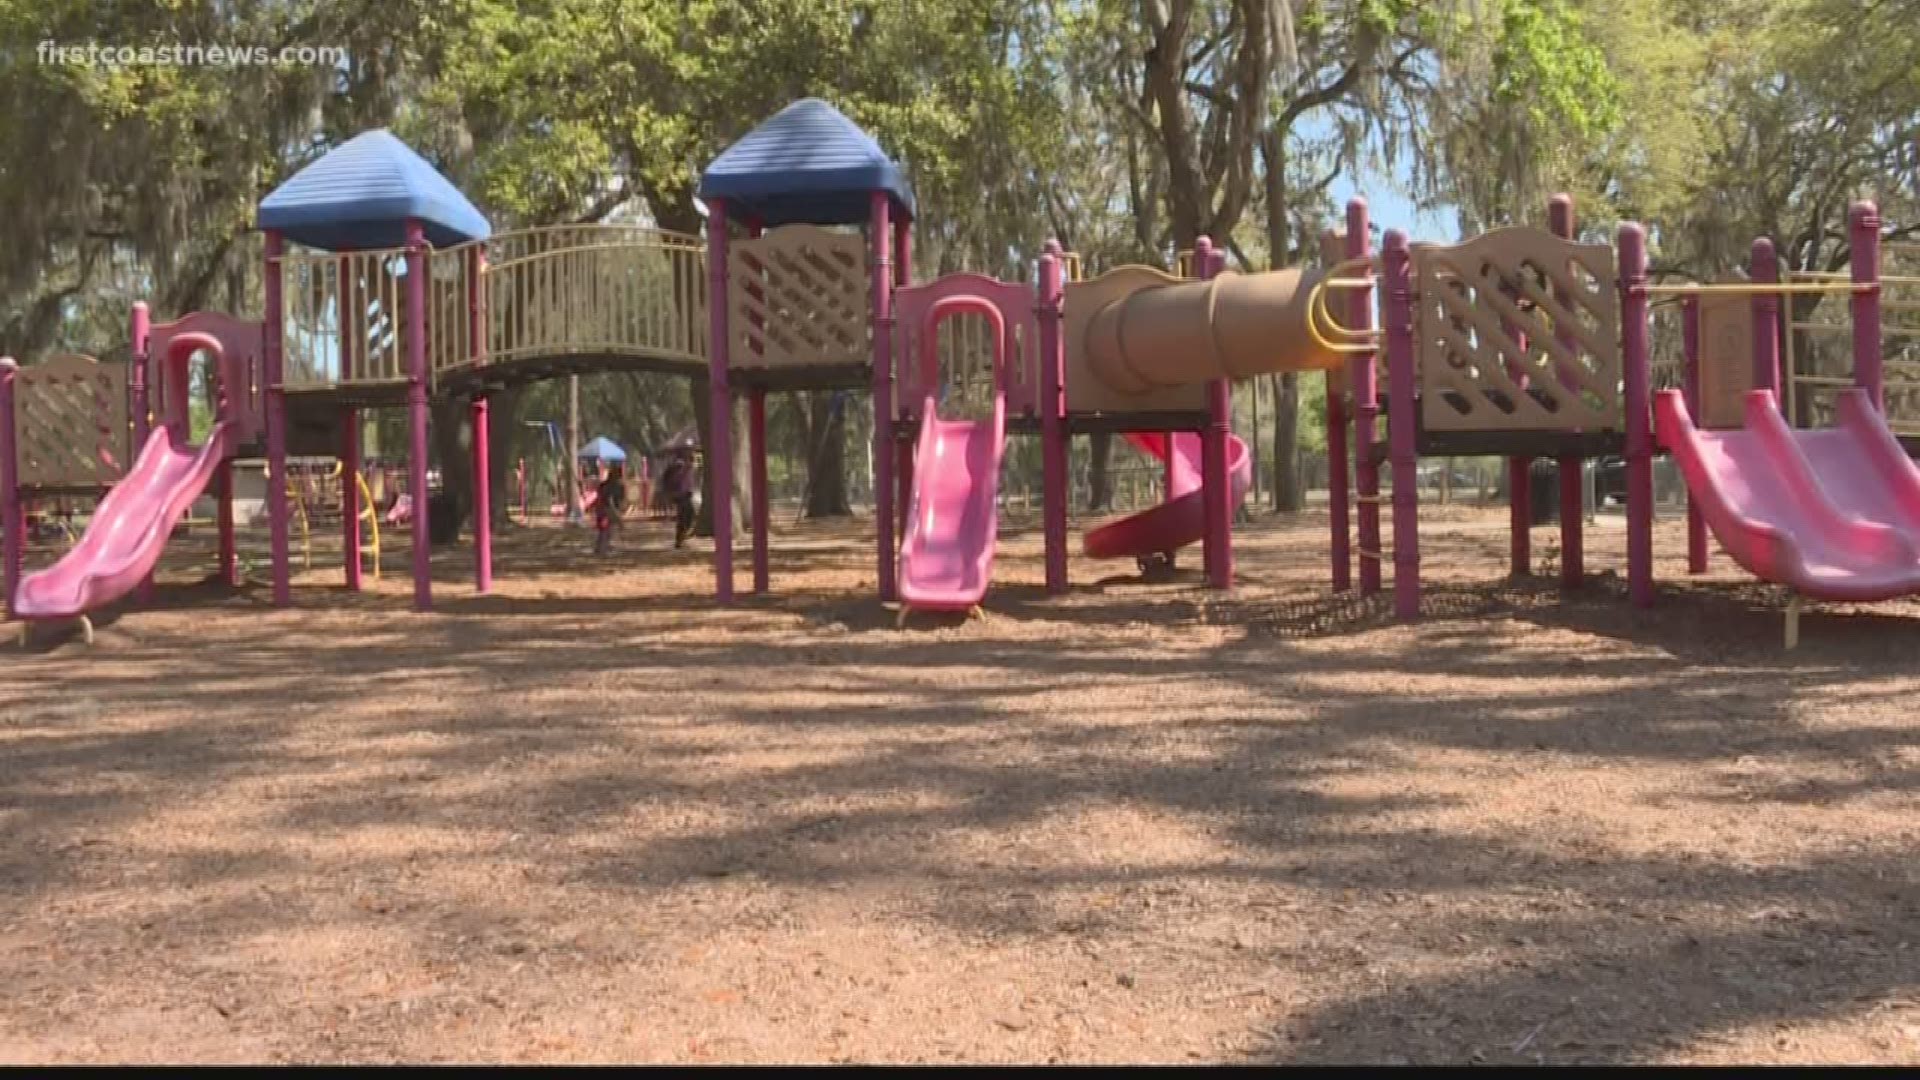 City Council is discussing an ordancance that would set aside $350,000 to build a new playground in Northwest Jacksonville.